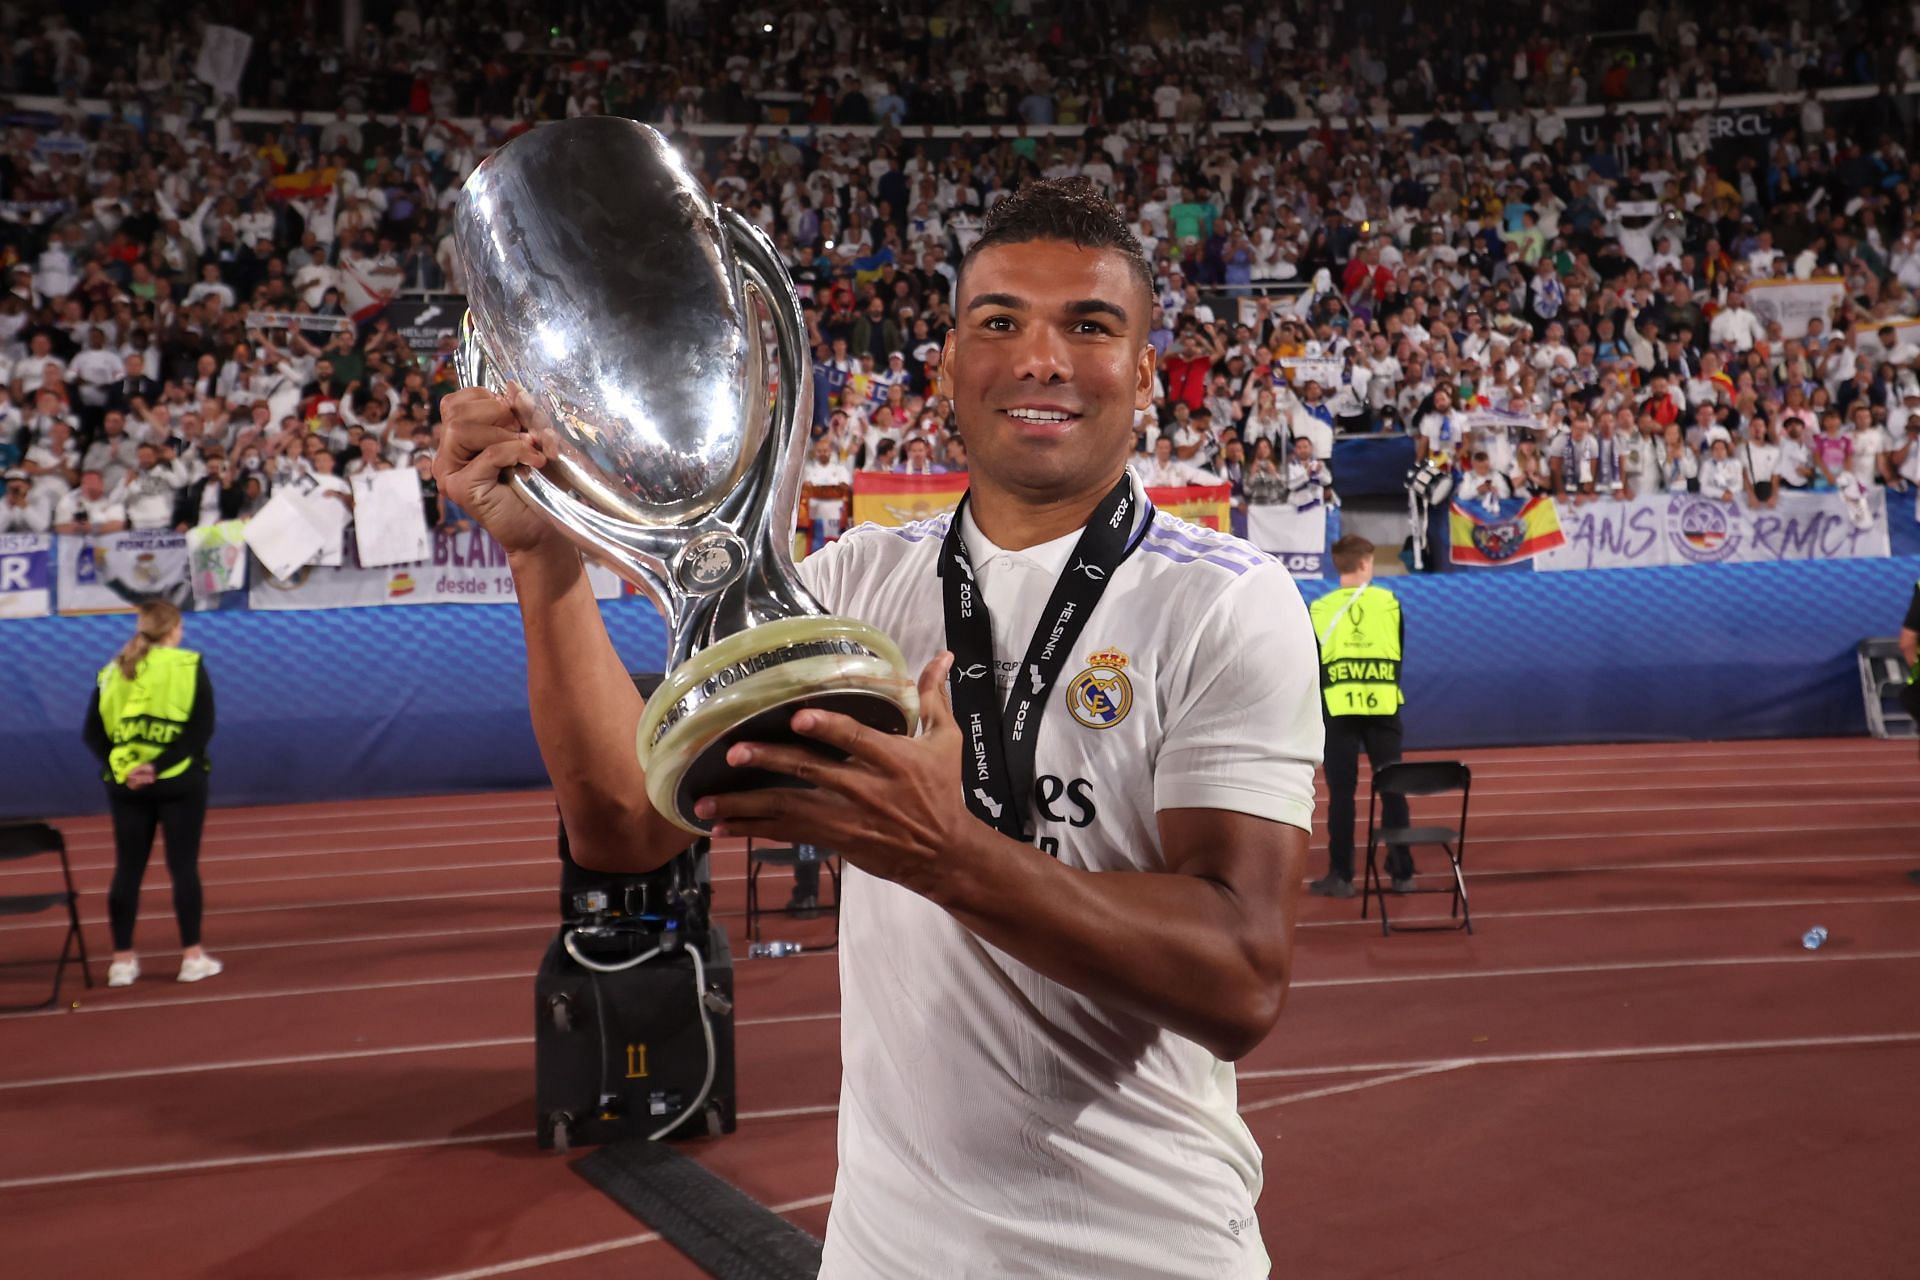 Casemiro is close to moving to Old Trafford this summer.